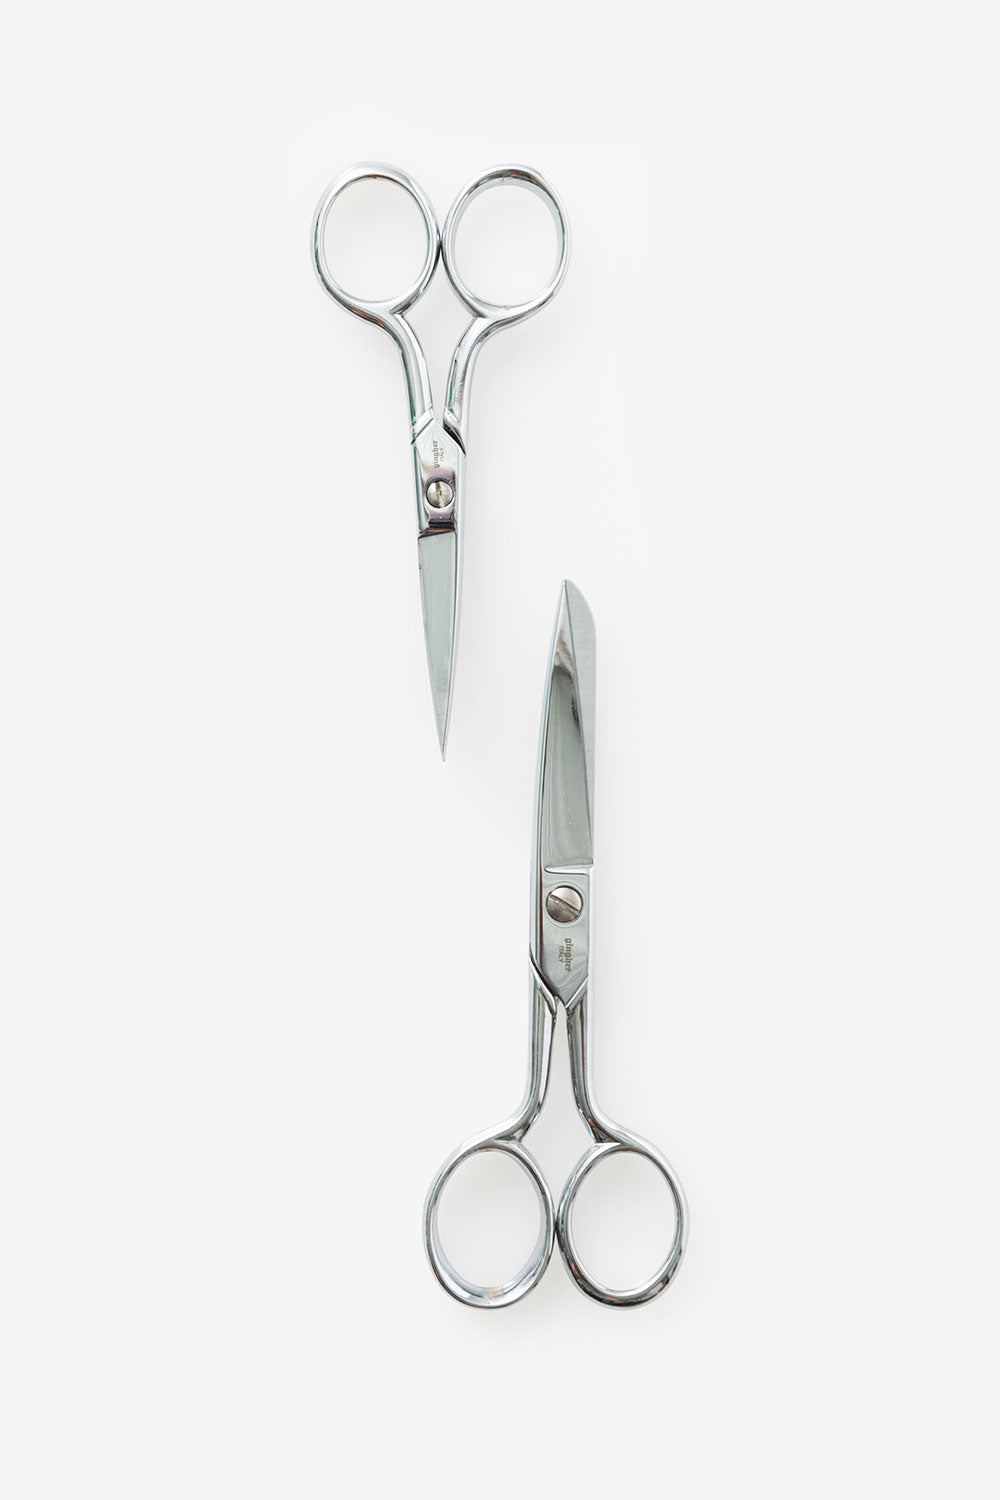 image of Classic Embroidery Scissors